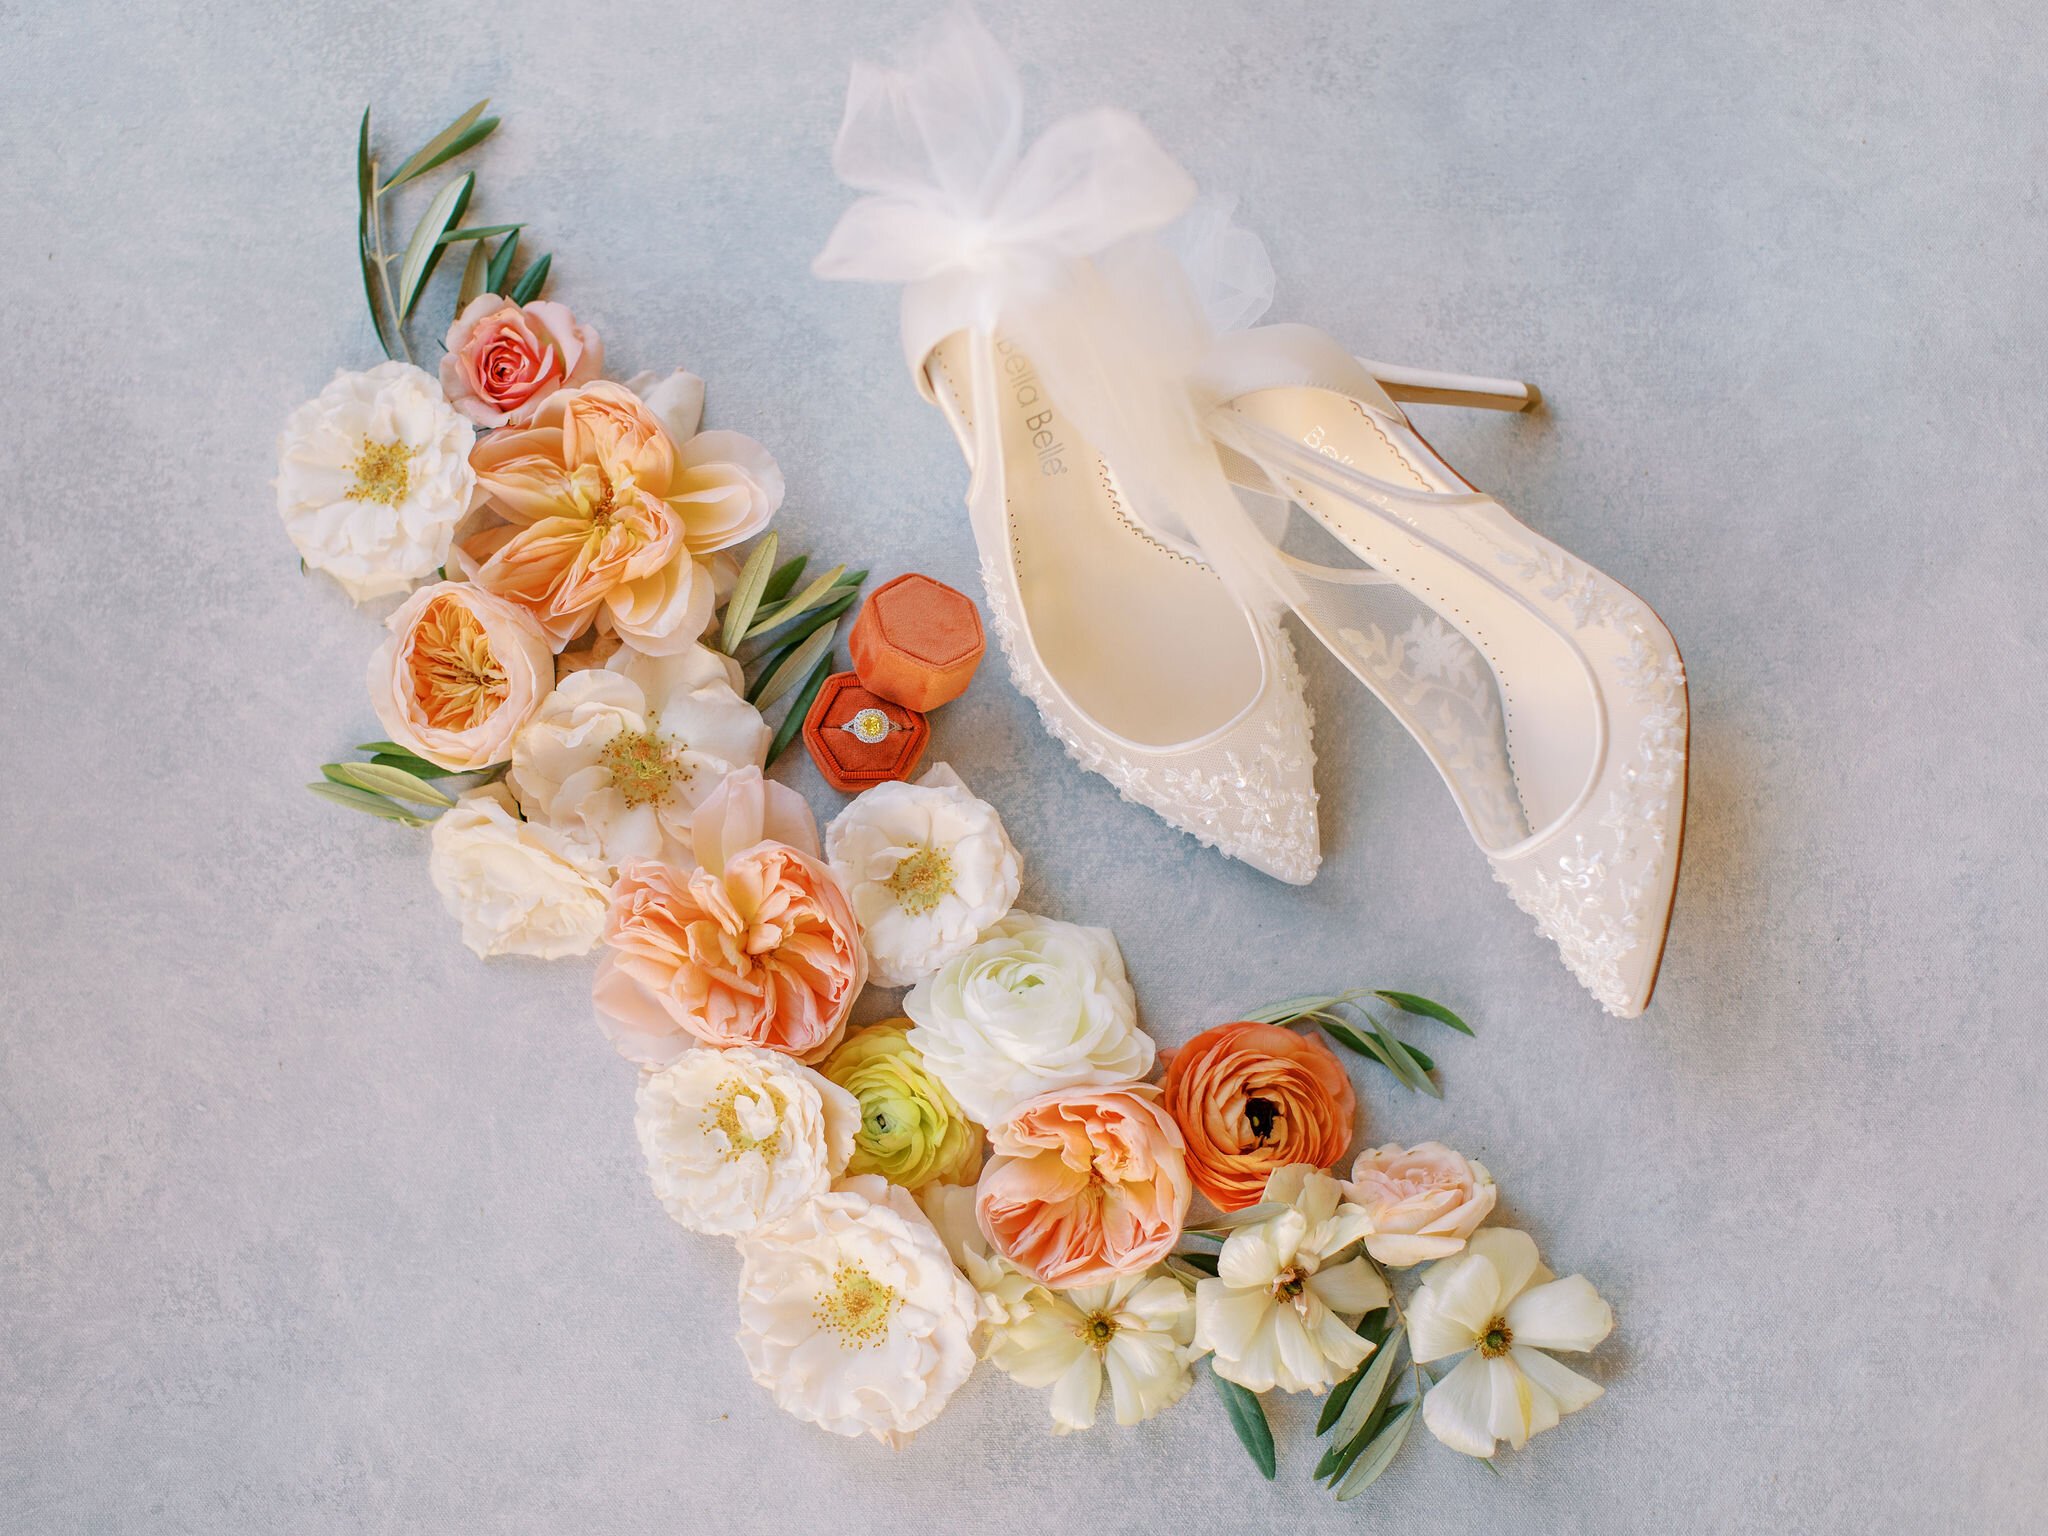 www.santabarbarawedding.com | Vivian Morrow | Sunstone Villa | H &amp; L Lovely Creations | Solstice Bloom | Chasing Stone | Bella Belle Shoes | Bride’s Shoes and Florals